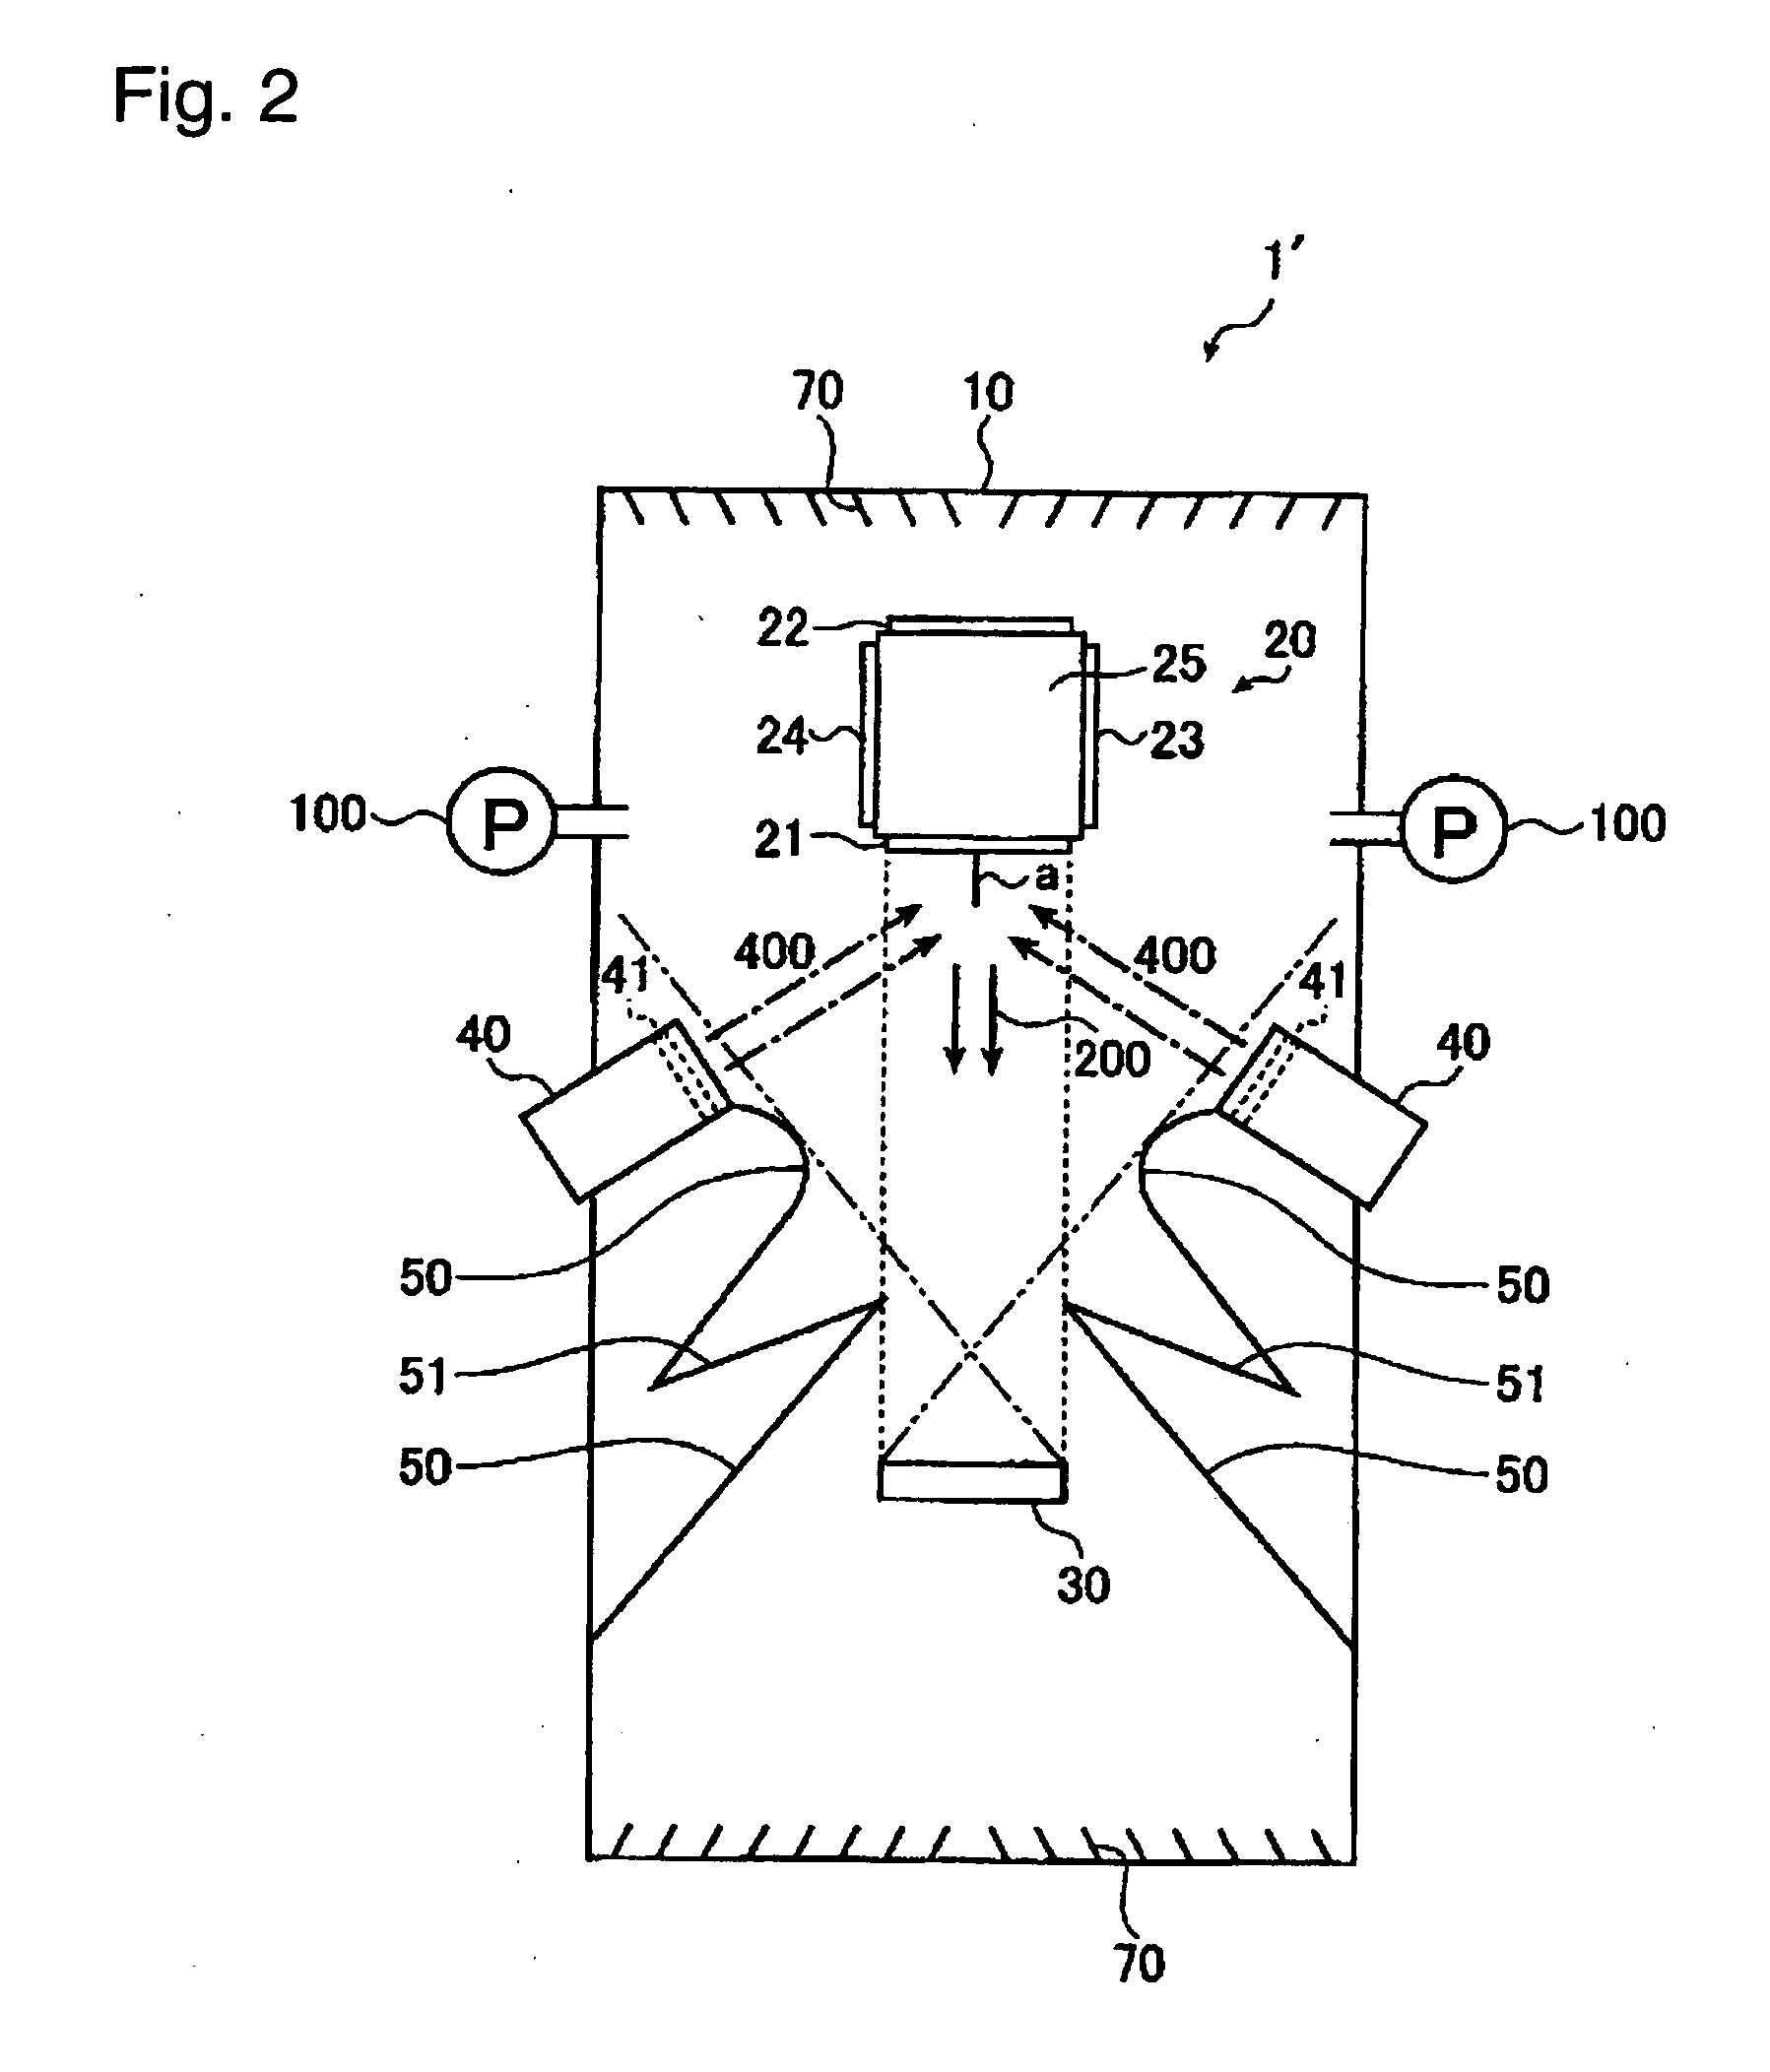 Ion beam sputtering apparatus and film deposition method for a multilayer for a reflective-type mask blank for EUV lithography